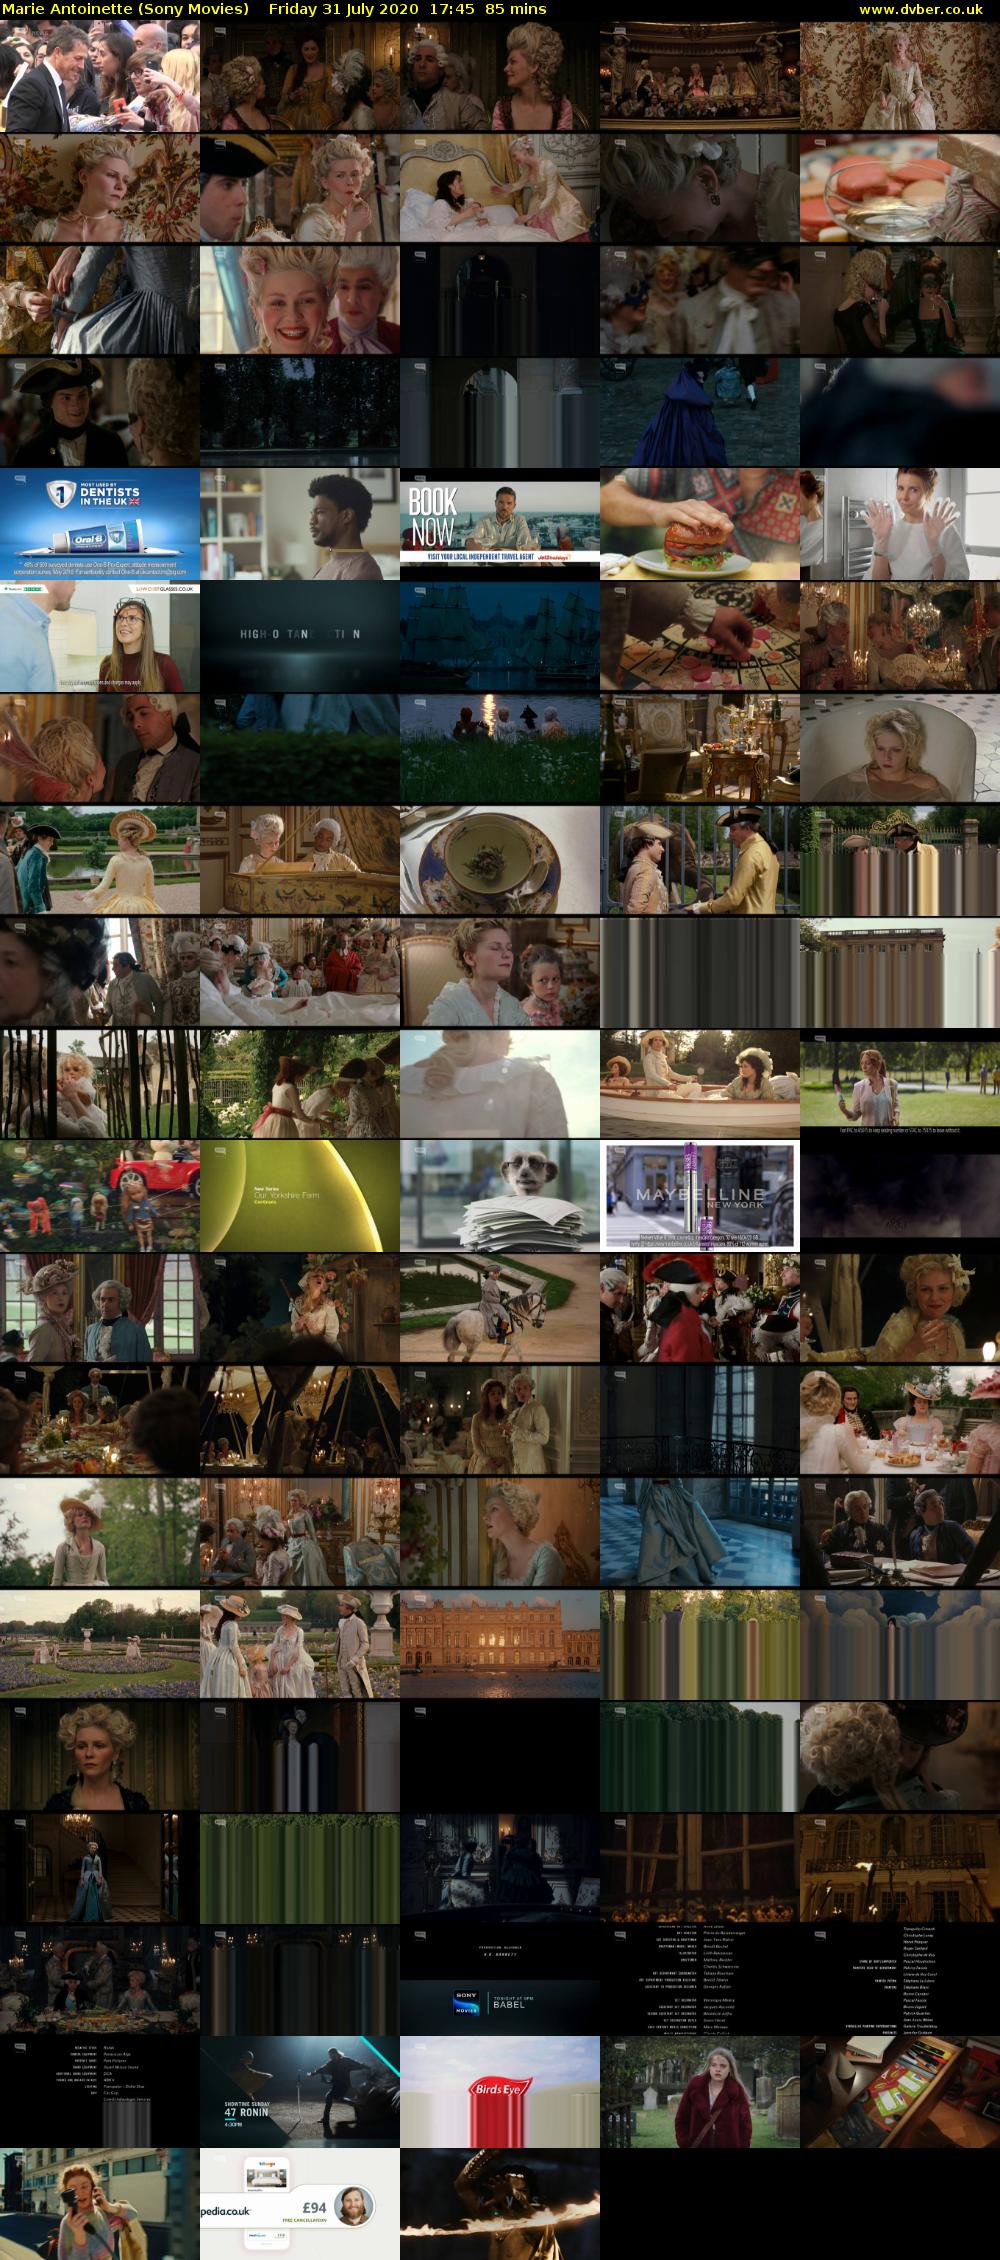 Marie Antoinette (Sony Movies) Friday 31 July 2020 17:45 - 19:10